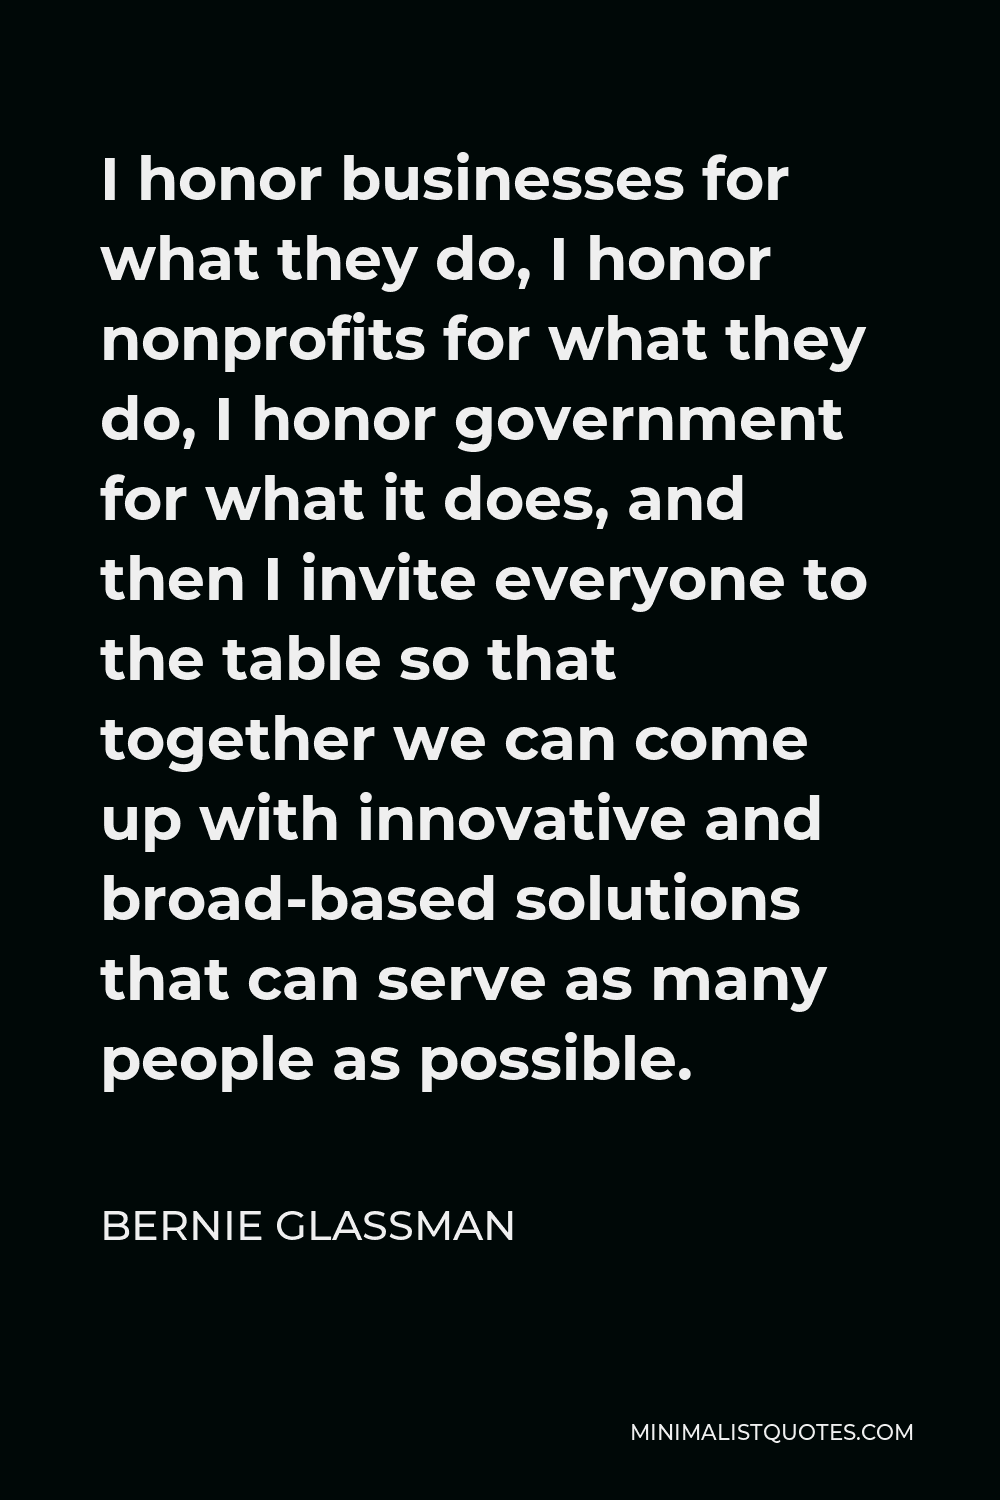 Bernie Glassman Quote - I honor businesses for what they do, I honor nonprofits for what they do, I honor government for what it does, and then I invite everyone to the table so that together we can come up with innovative and broad-based solutions that can serve as many people as possible.